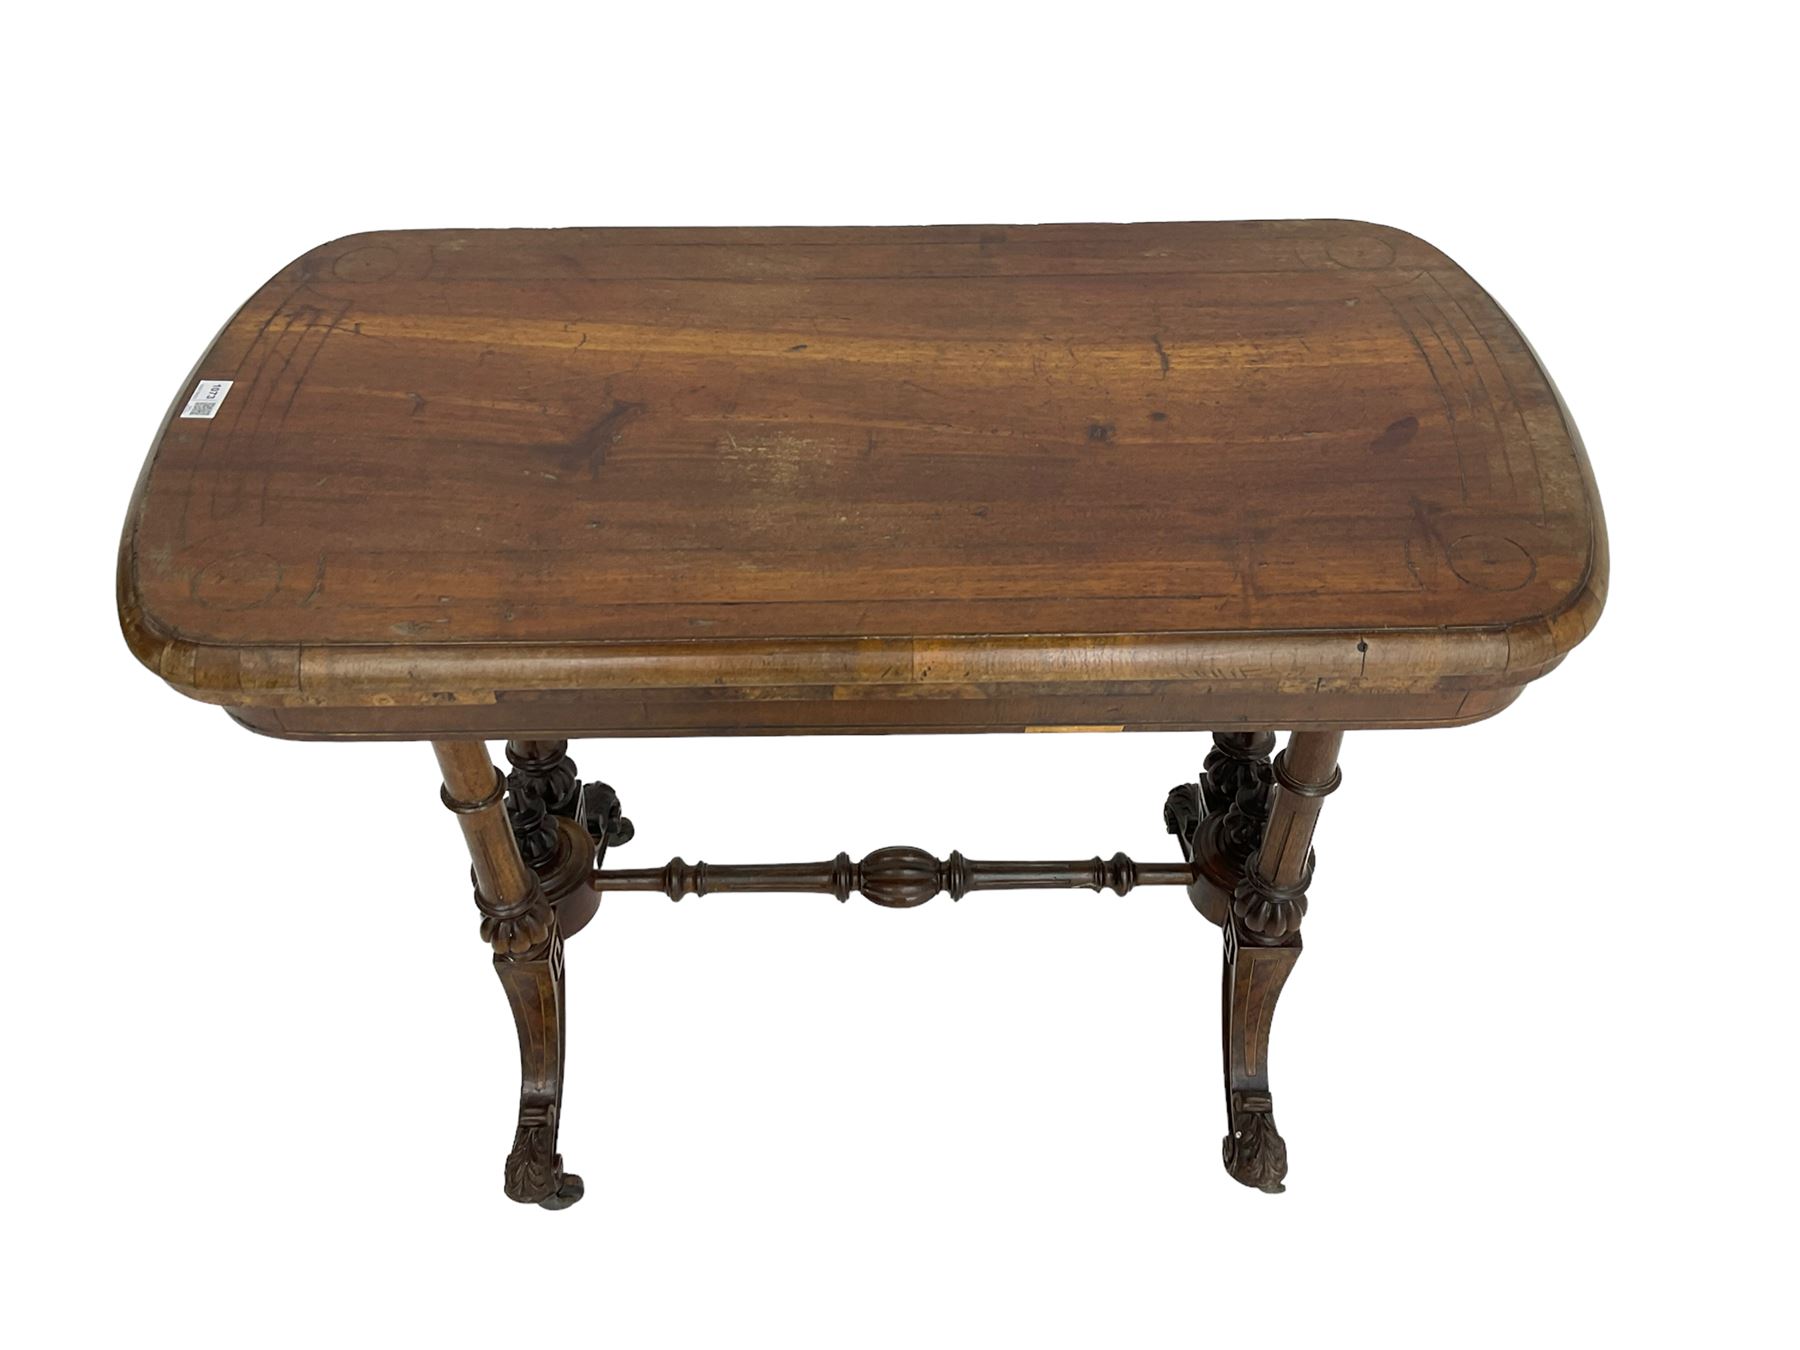 Victorian walnut stretcher side table - Image 3 of 6